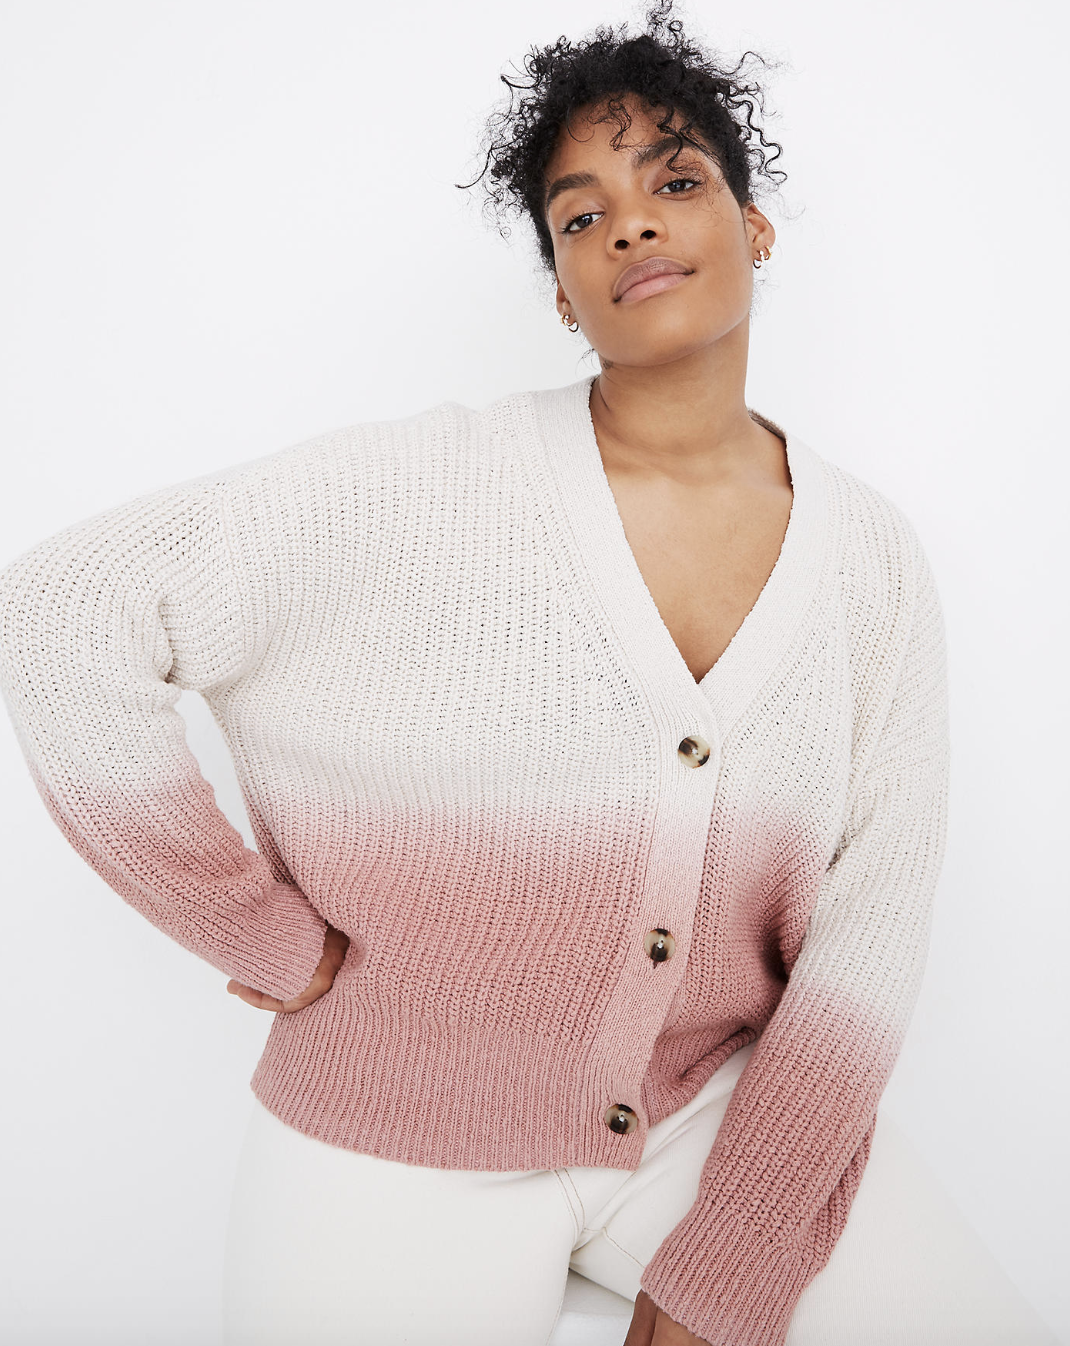 A model in a white knit button-up cardigan with a dip-dyed pink at the bottom of the body and sleeves 